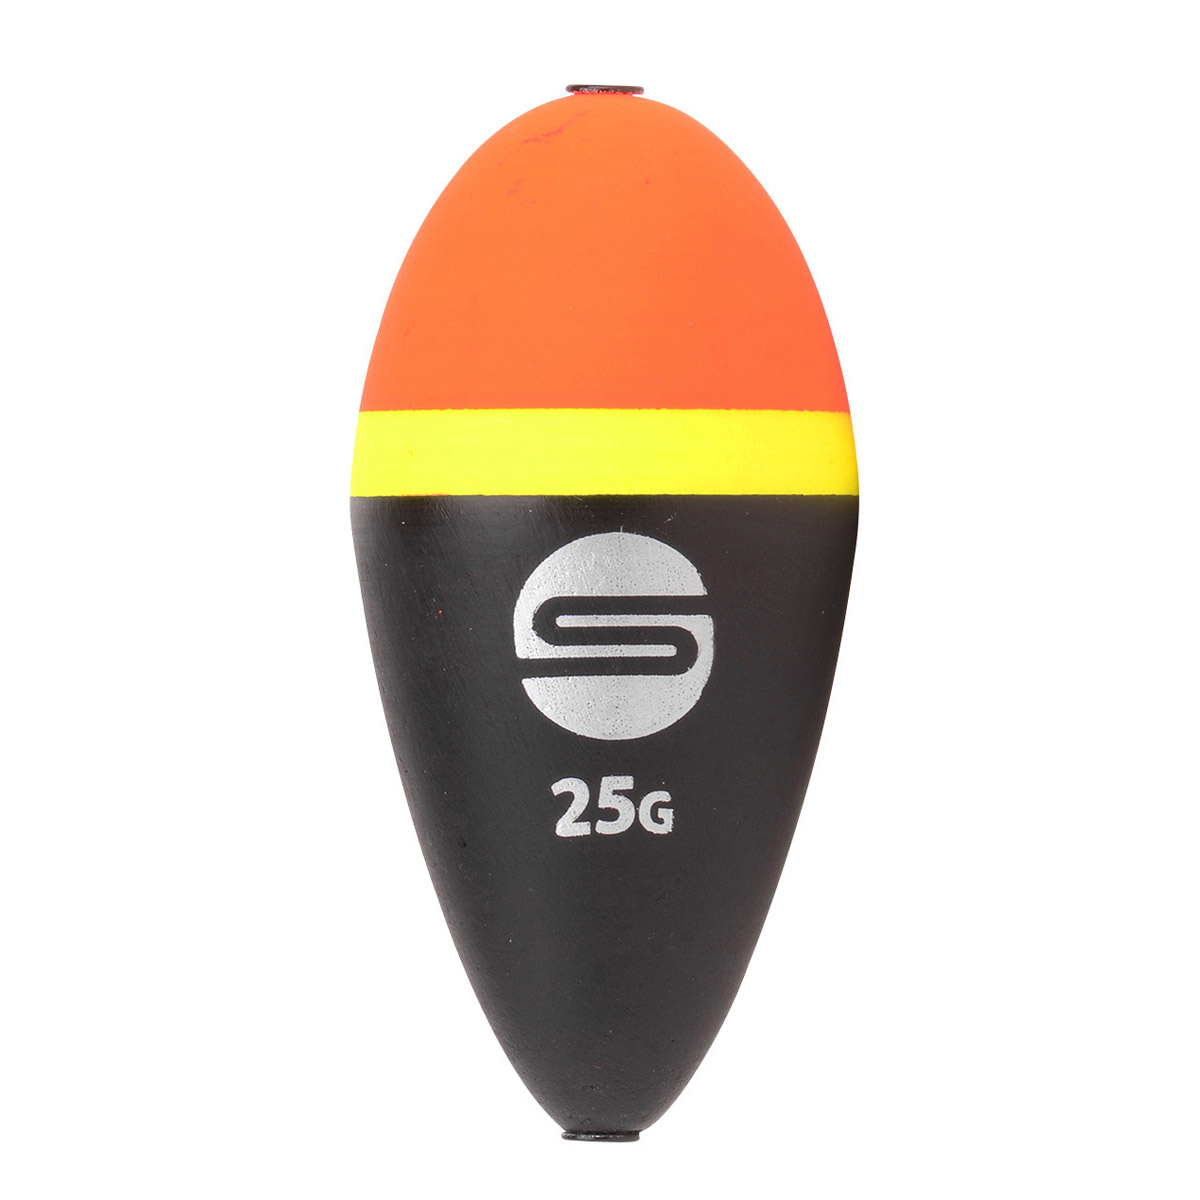 Spro Pike Oval Float 